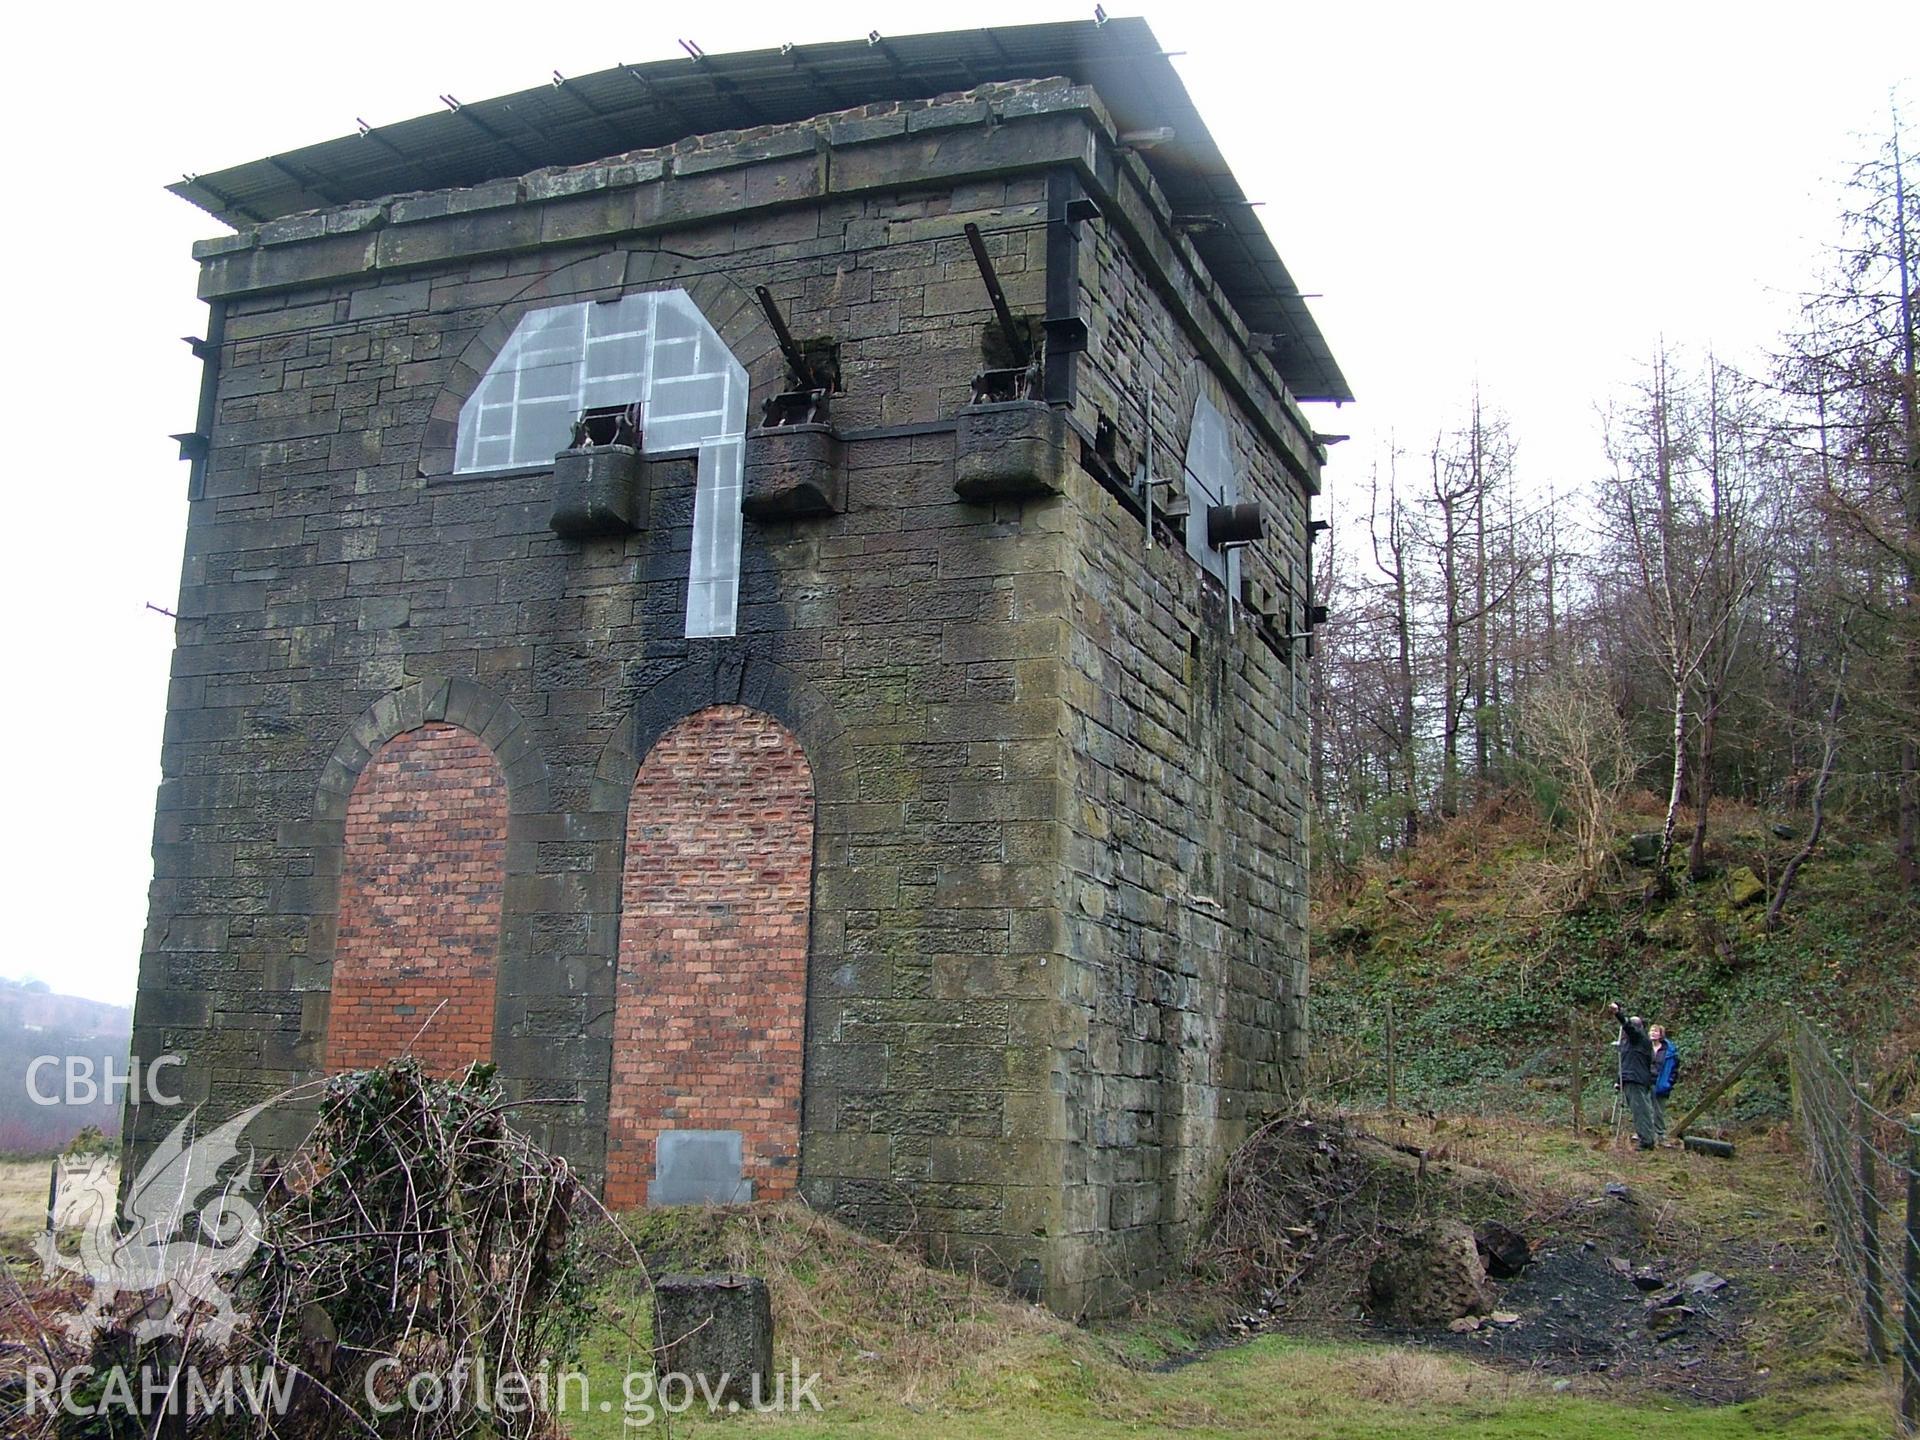 Vertical engine house with blocked openings.